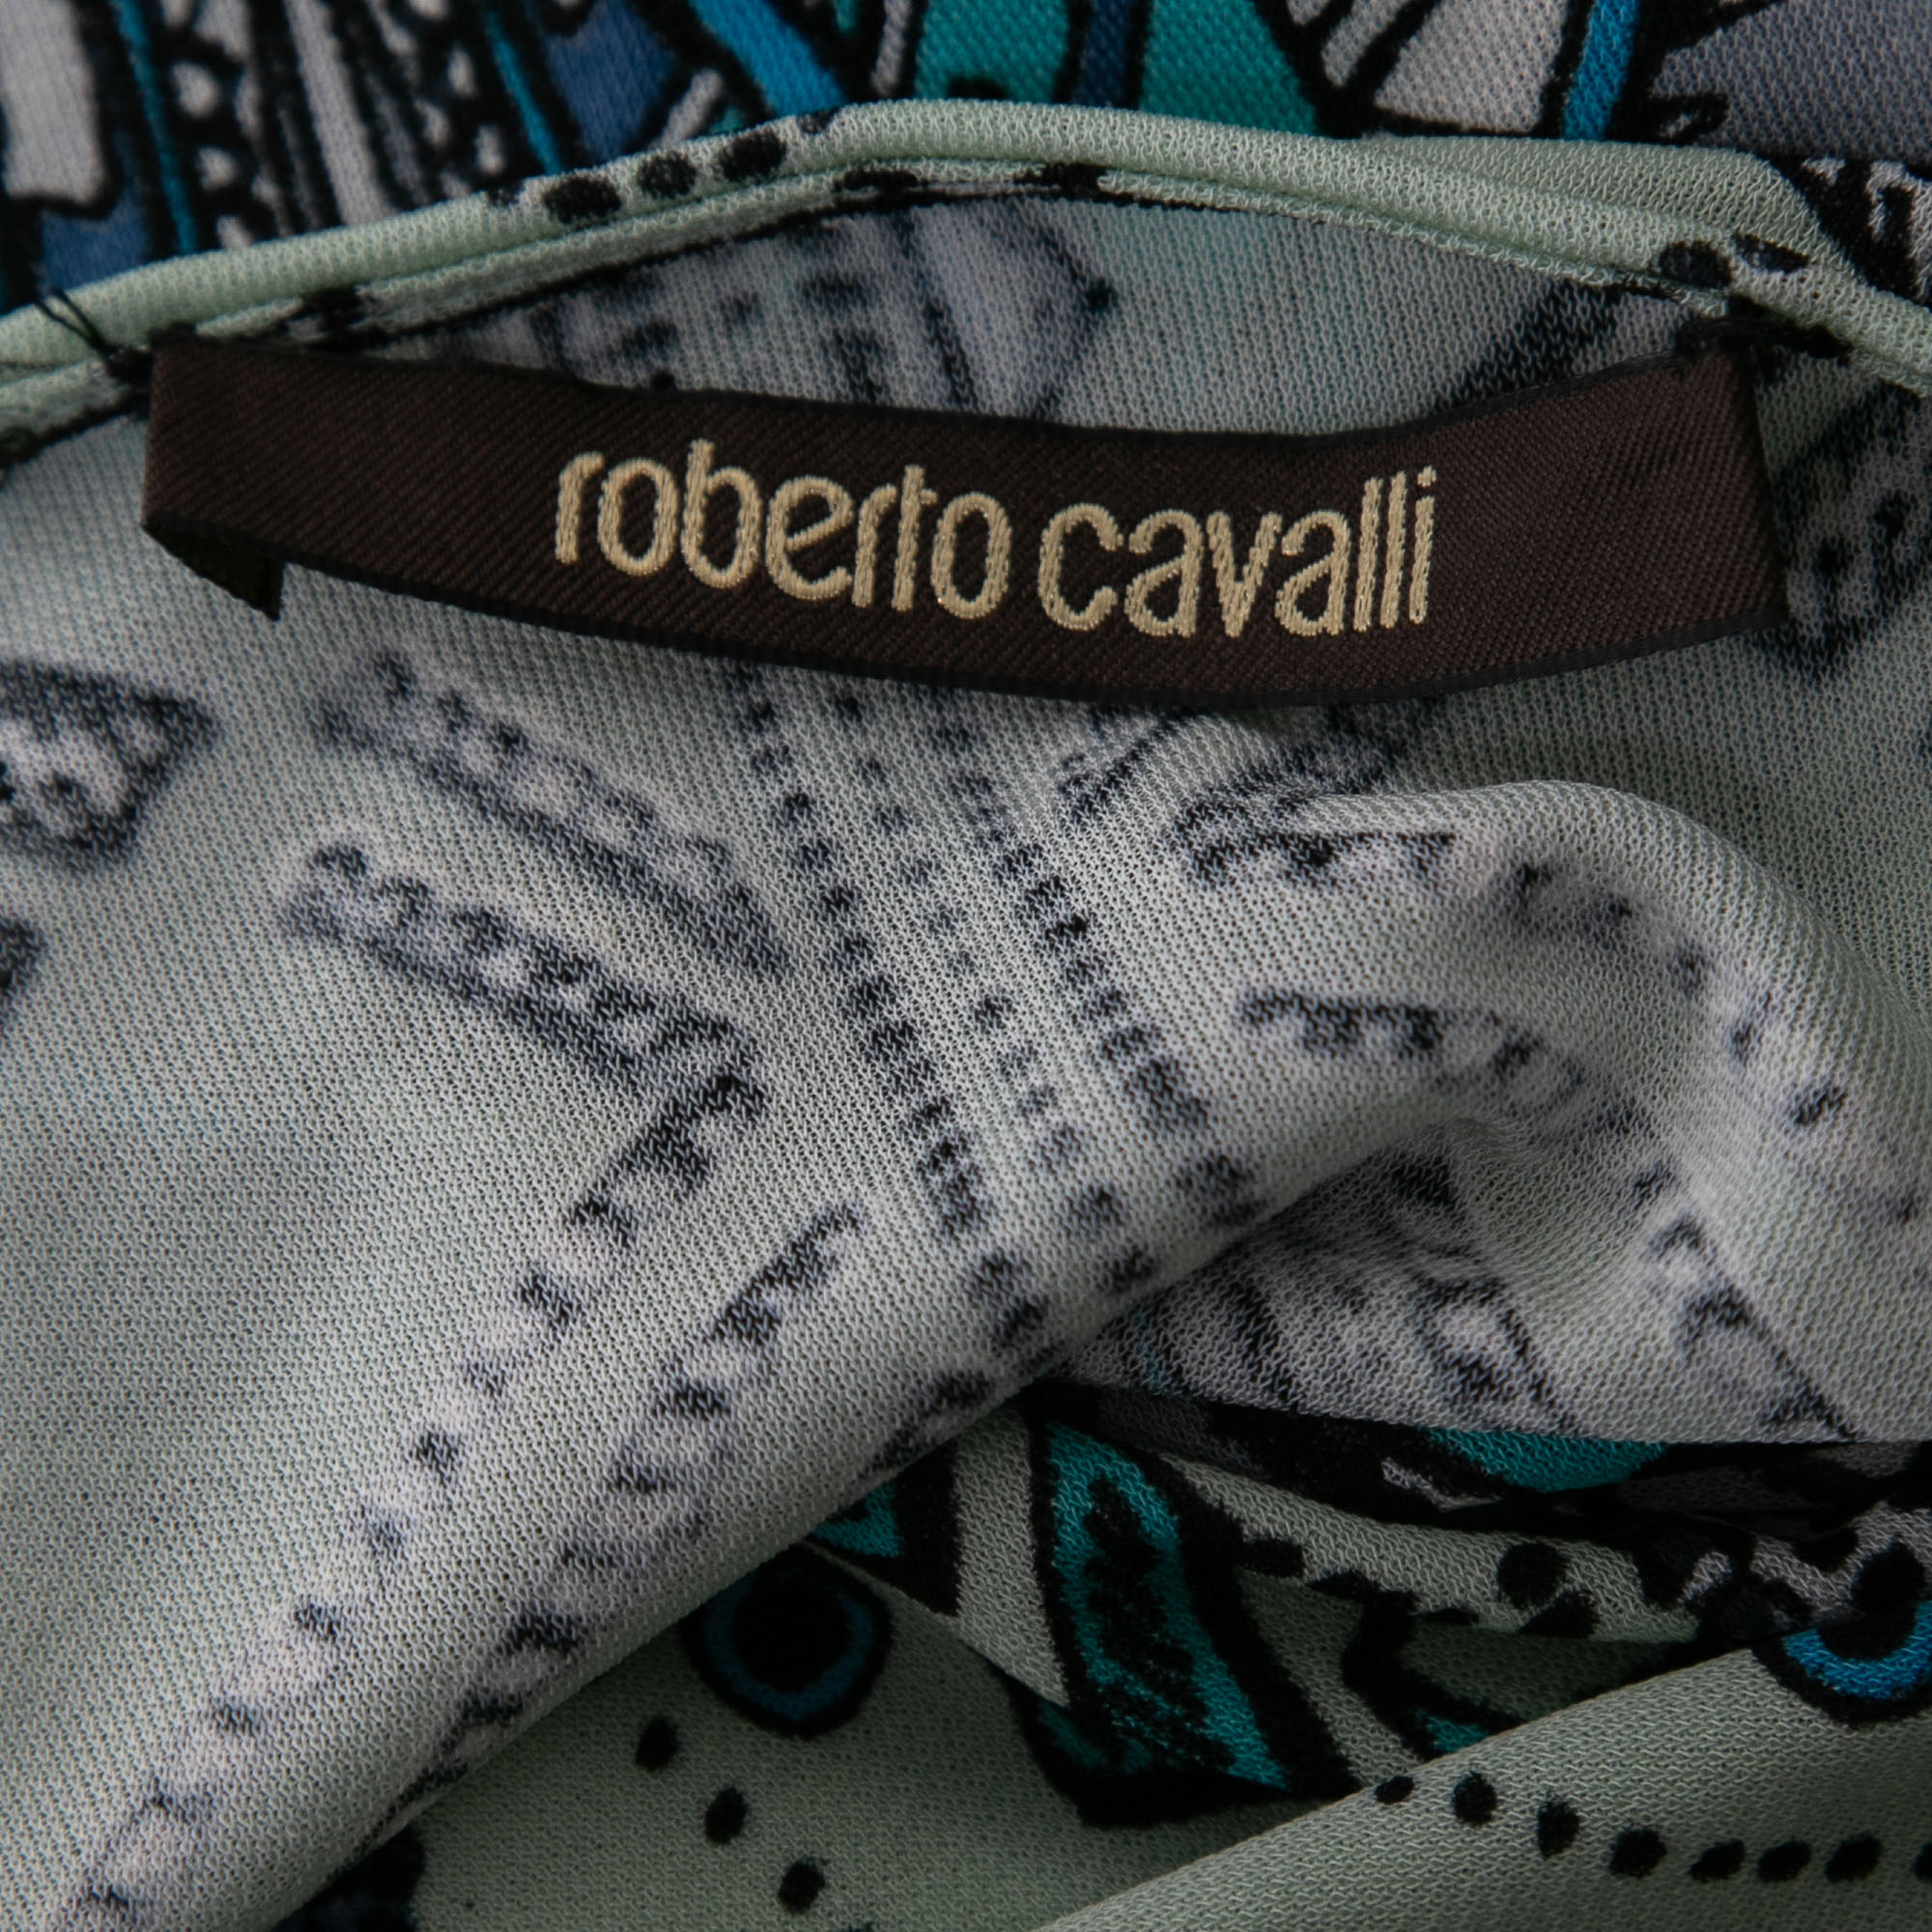 Roberto Cavalli Multicolor Printed Jersey Lace Trimmed Top M